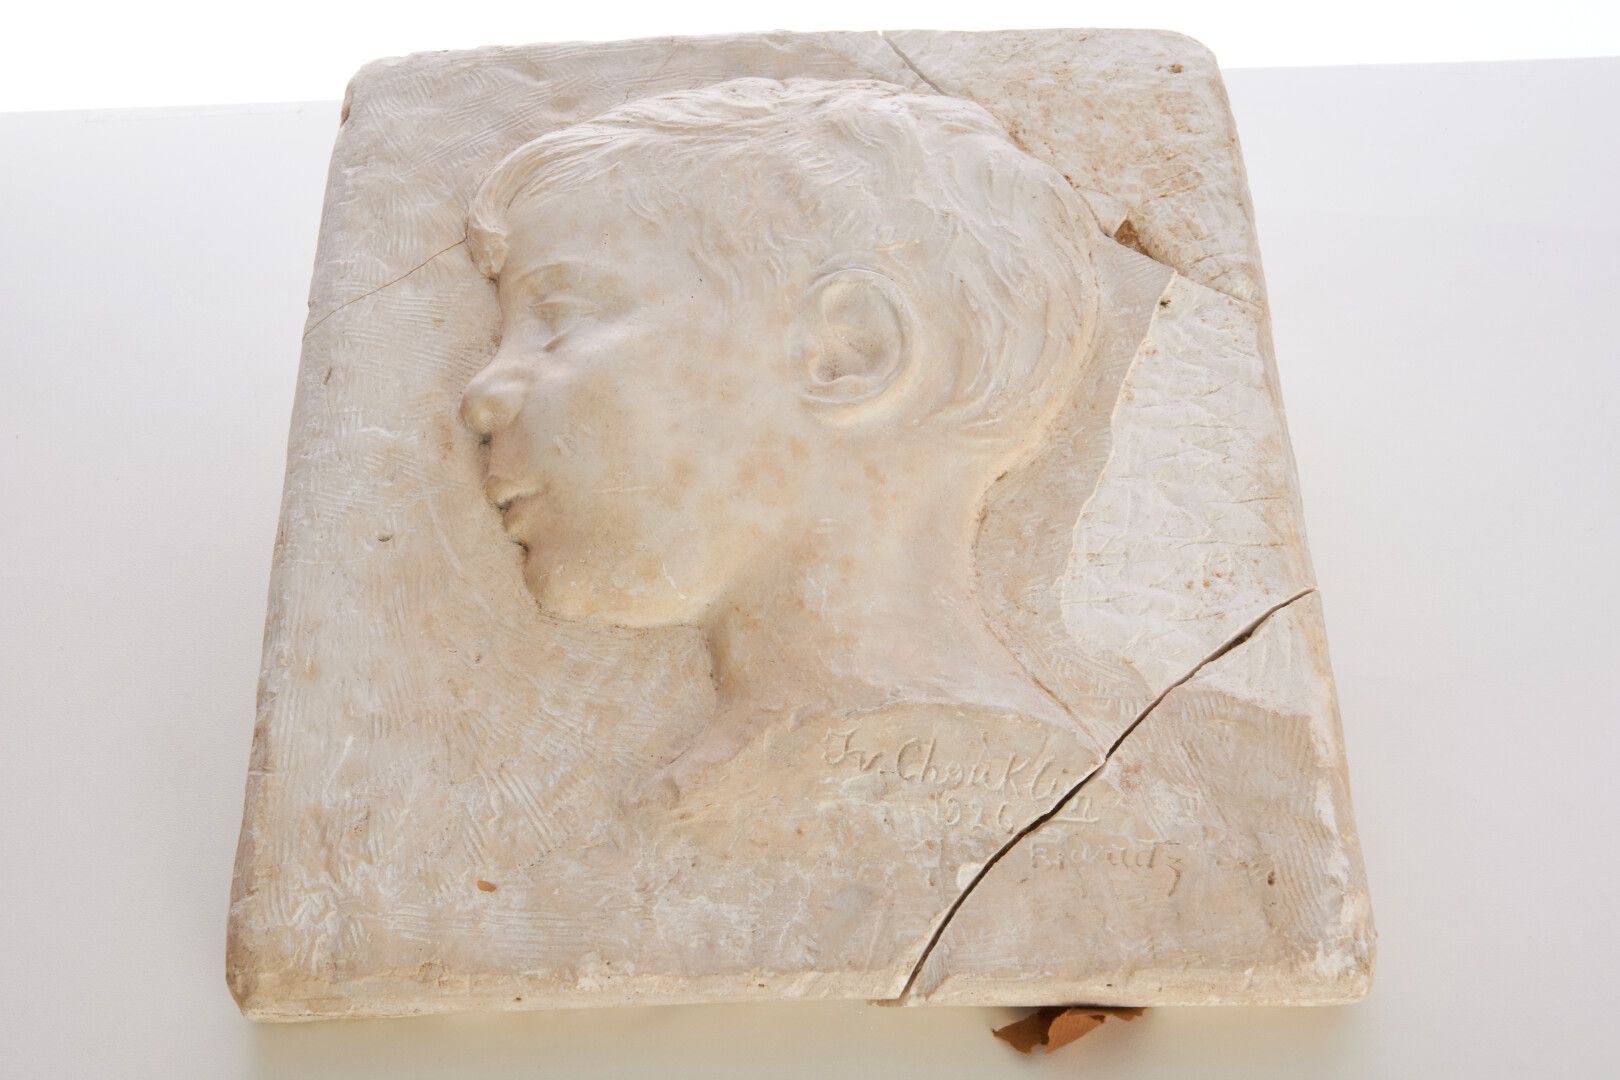 Null CHOUKLIN Yvan (1879-1958)

"Portrait of a young boy" low relief in plaster &hellip;